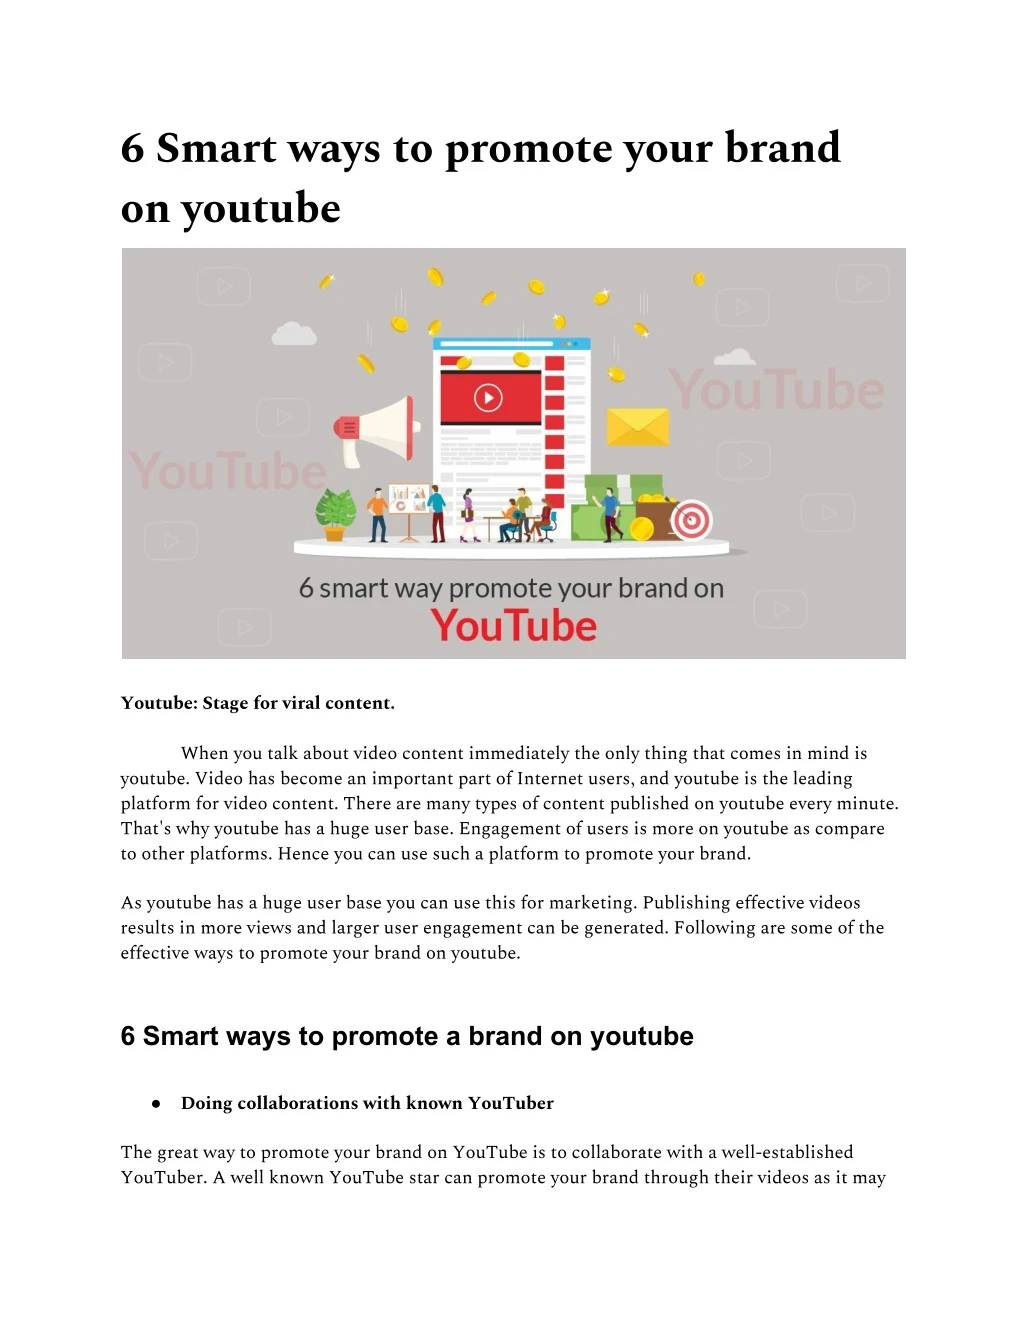 6 smart ways to promote your brand on youtube